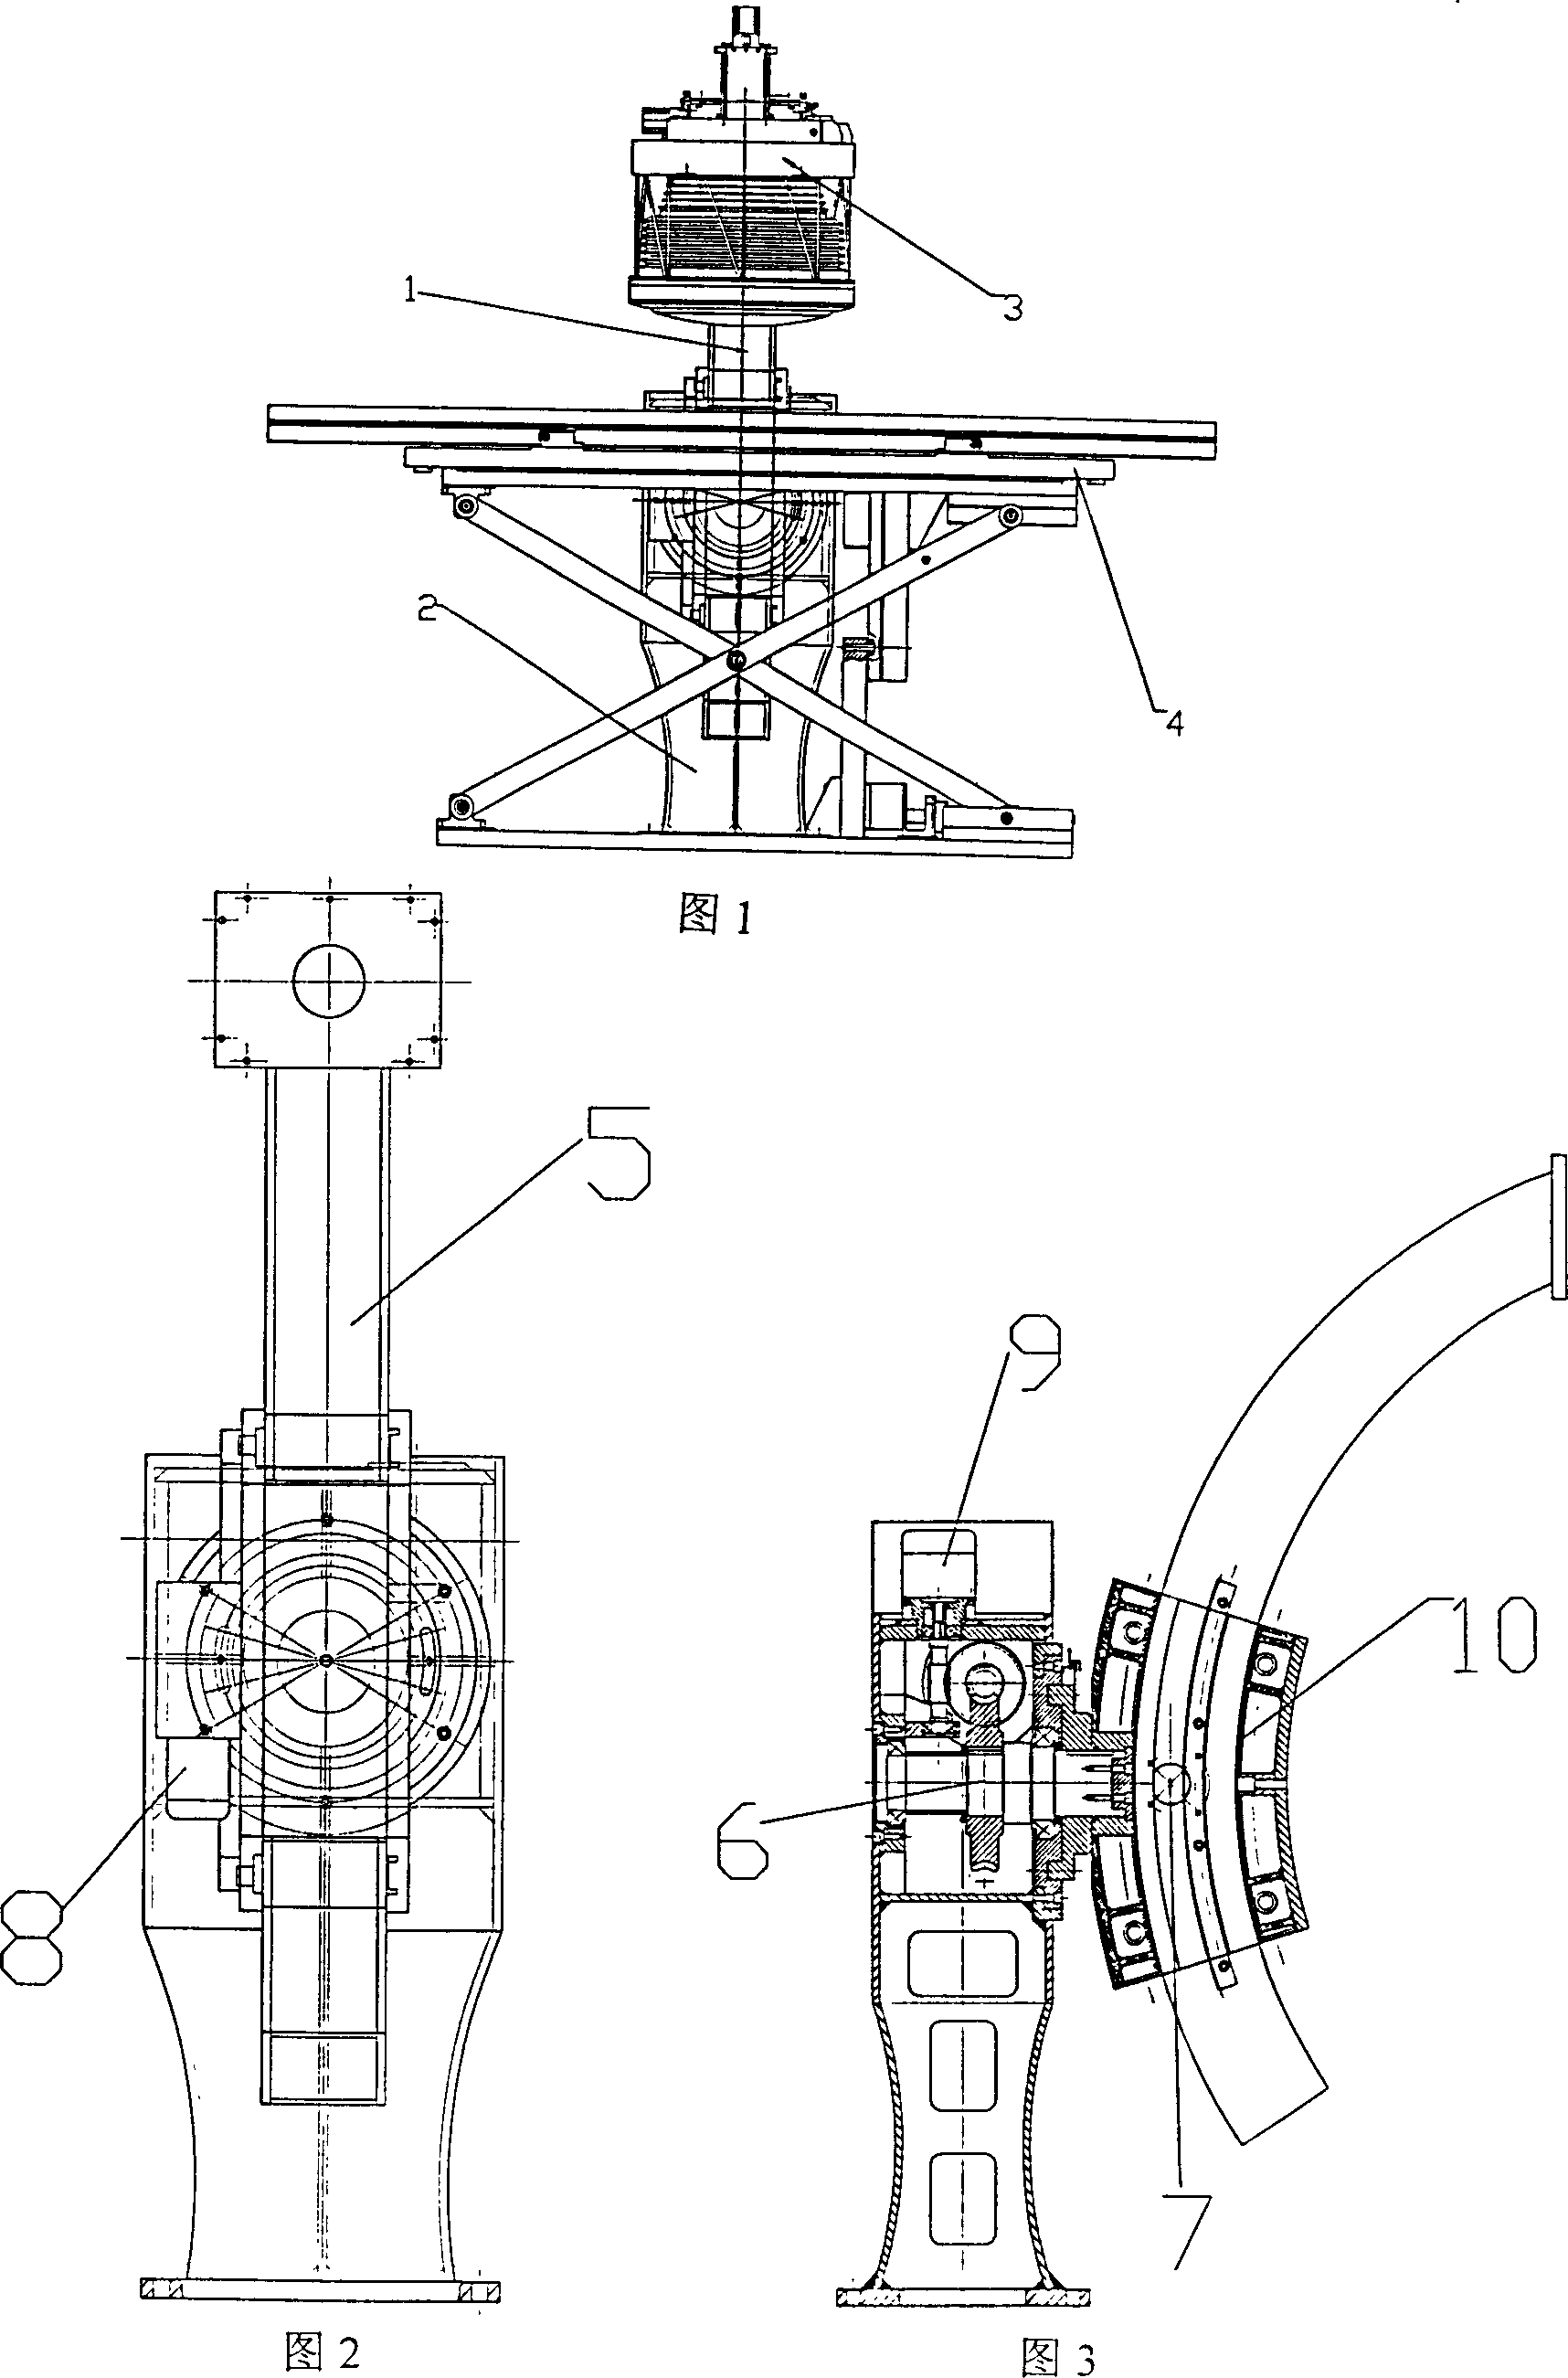 Stereo positioning system in high strength focusing ultrasonic operation